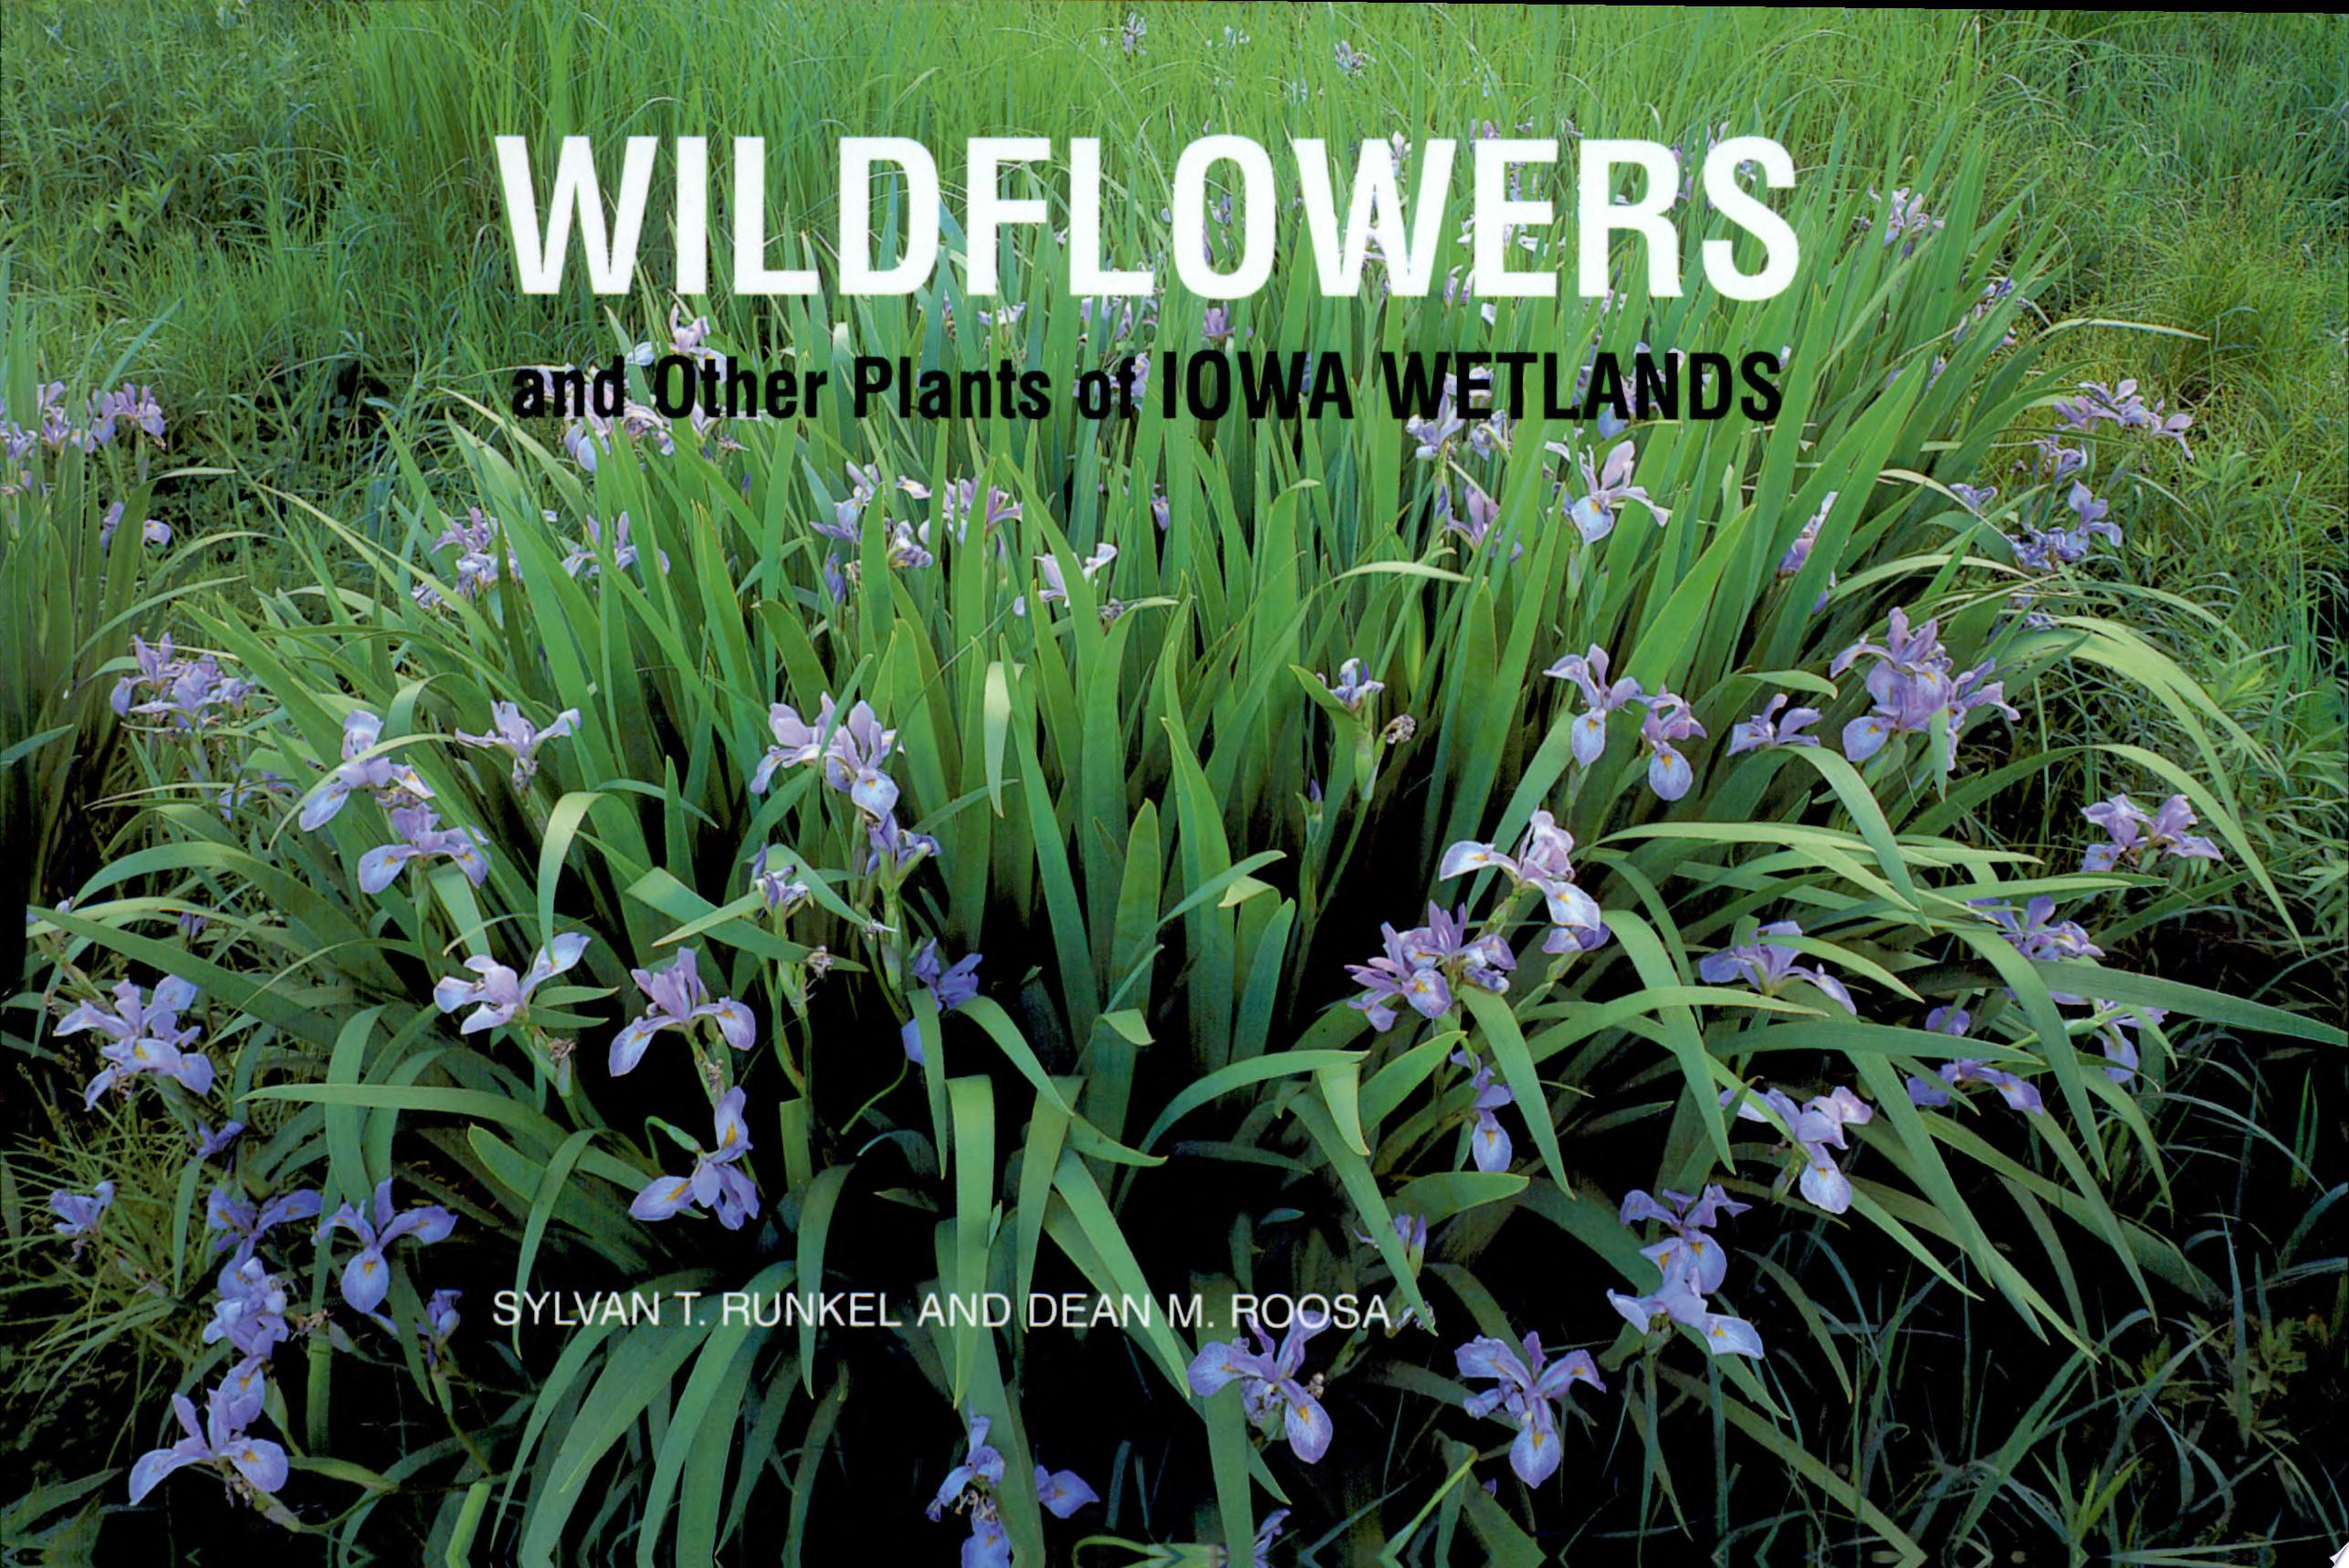 Image for "Wildflowers and Other Plants of Iowa Wetlands"